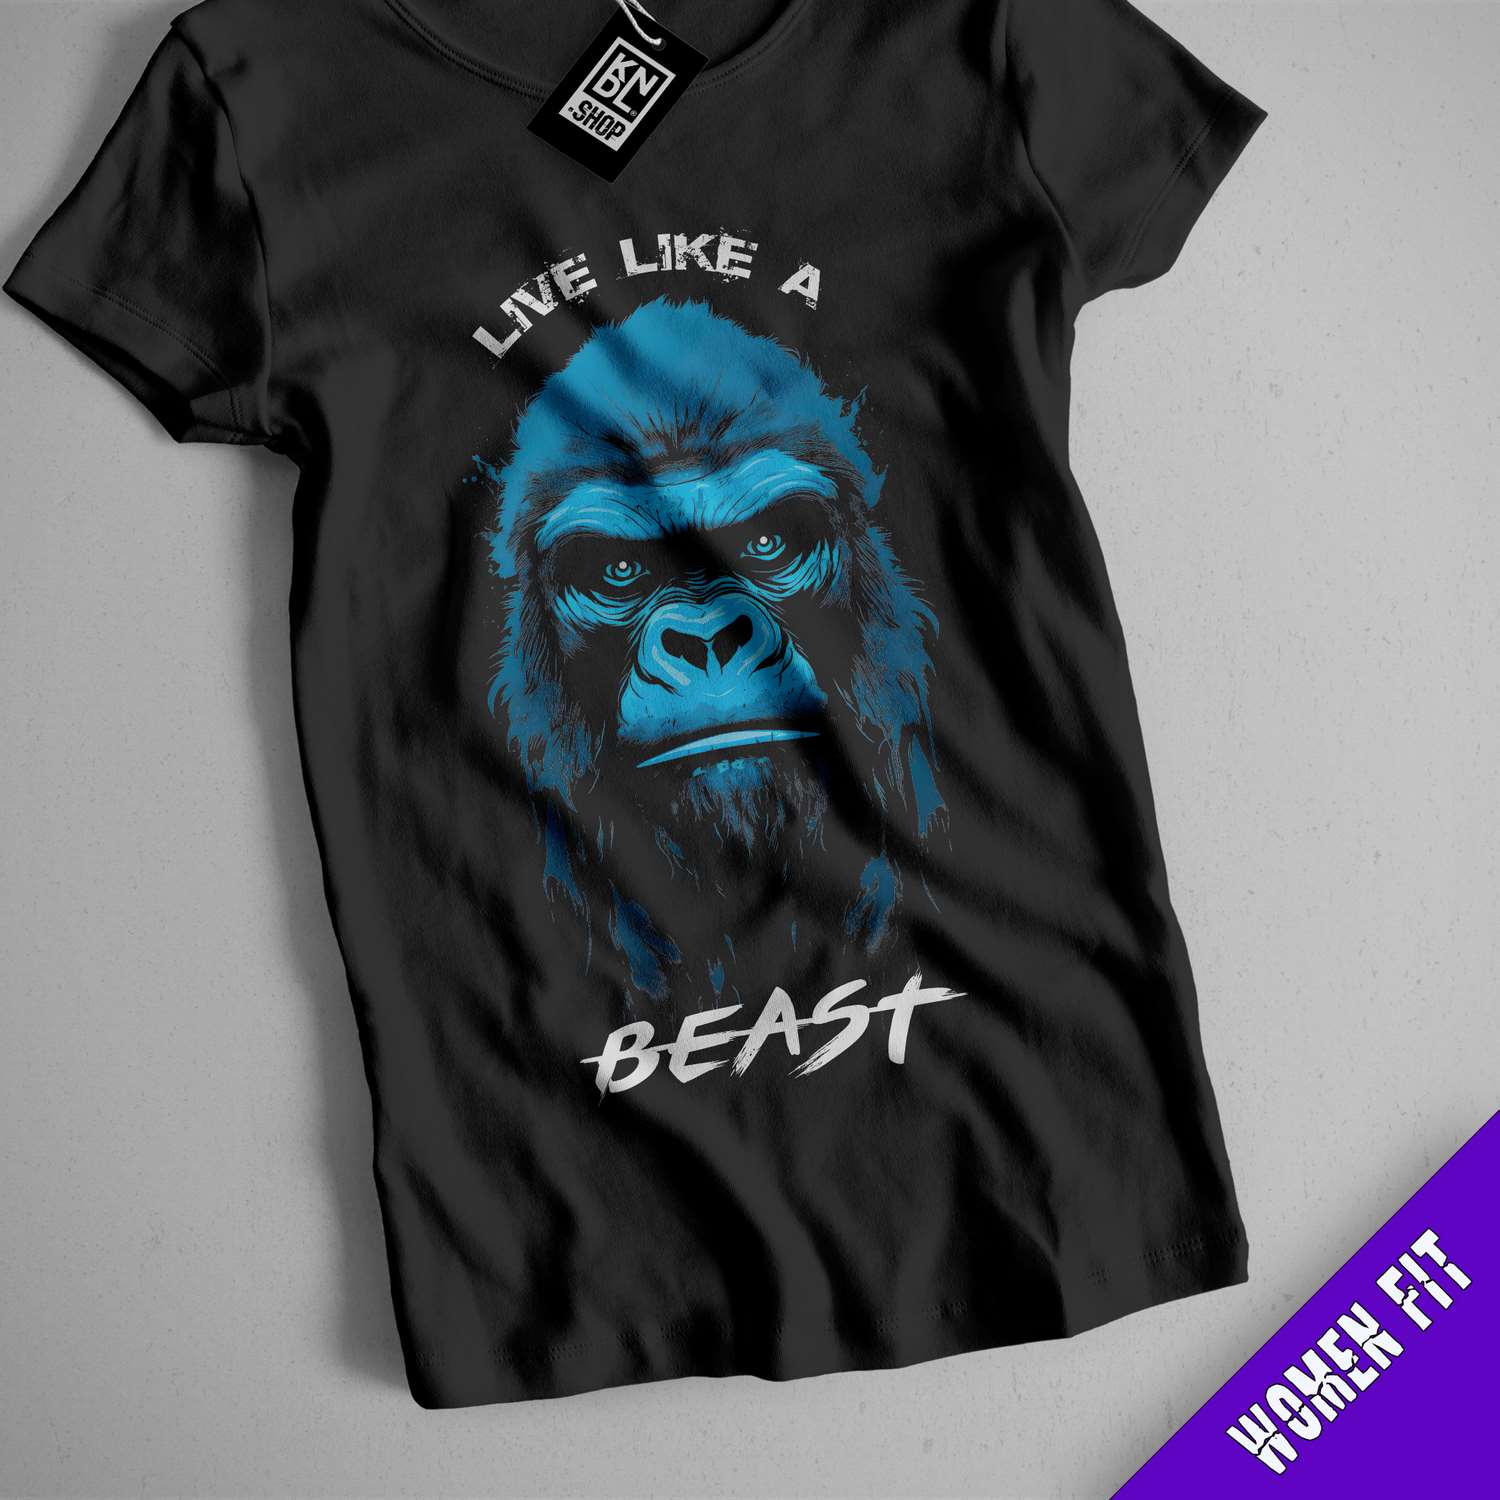 a t - shirt with a gorilla face on it